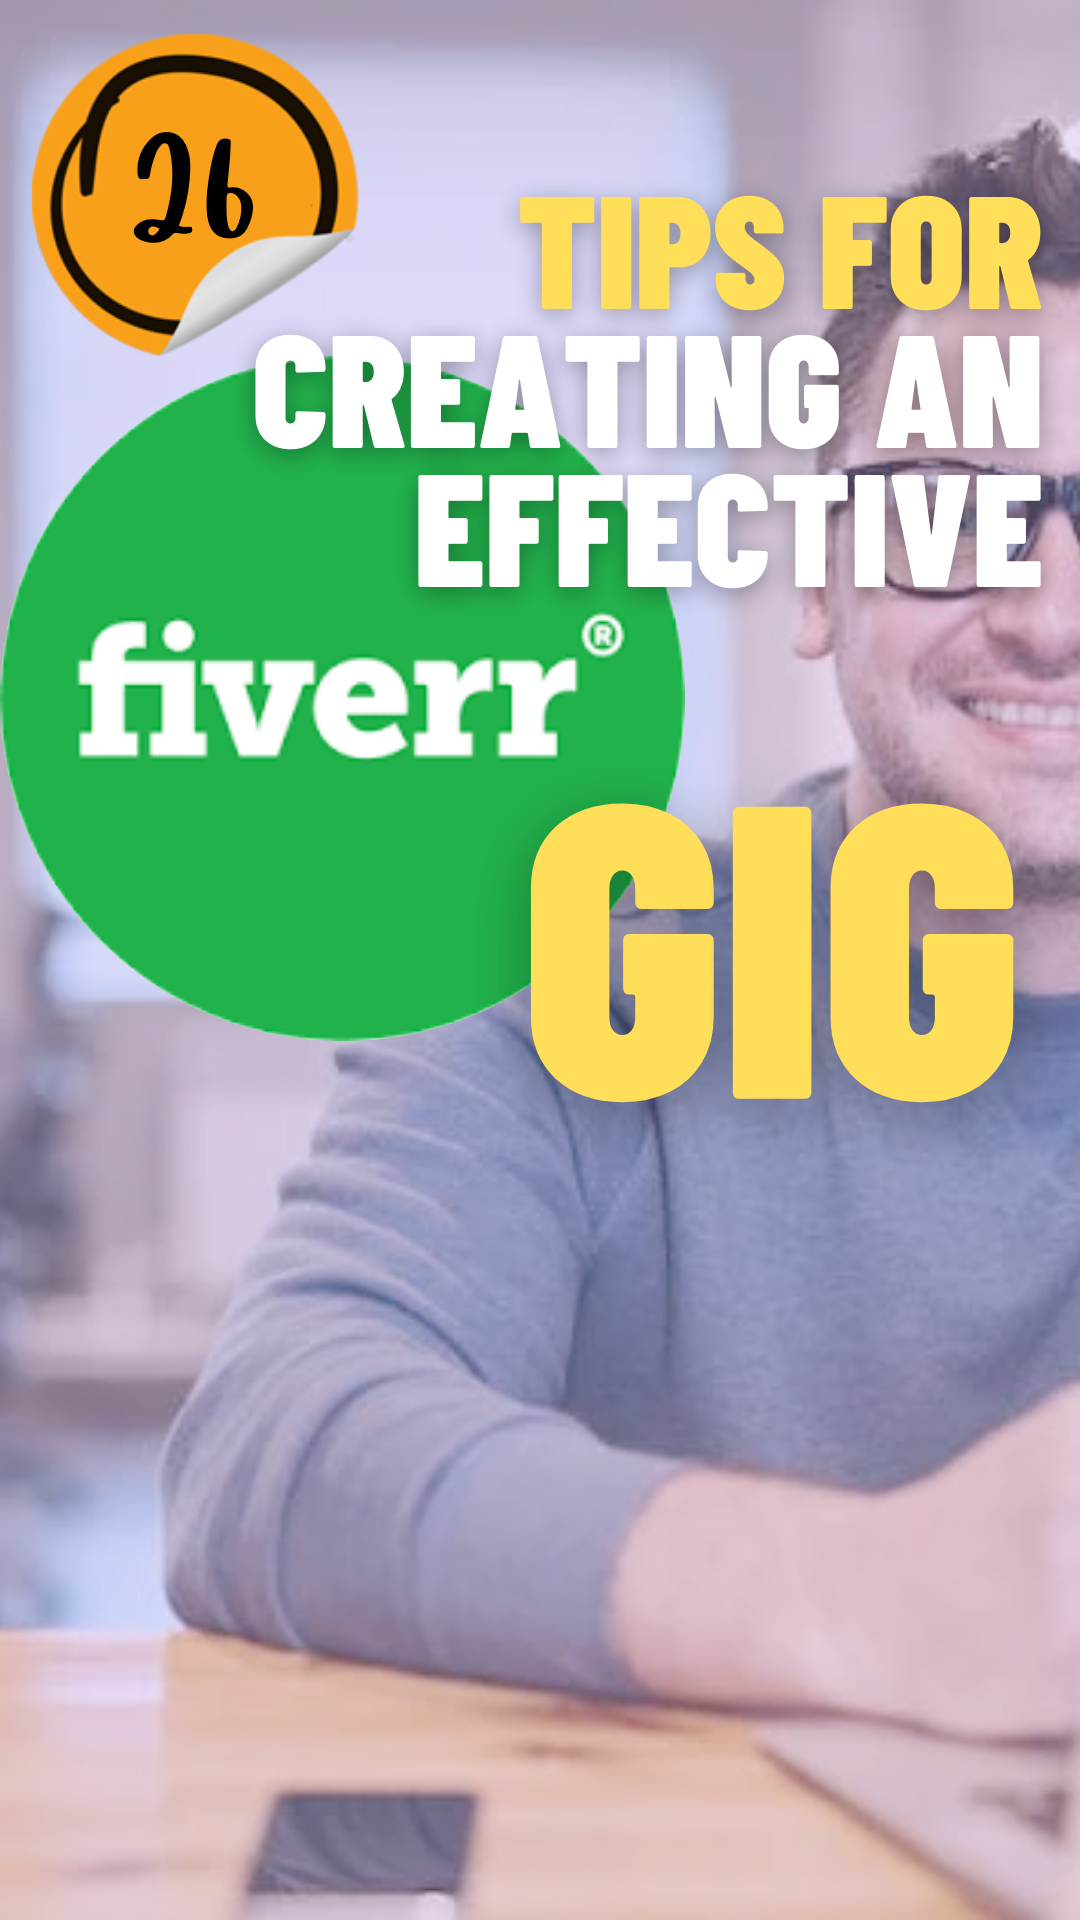 Tips for creating an effective Fiverr Gig